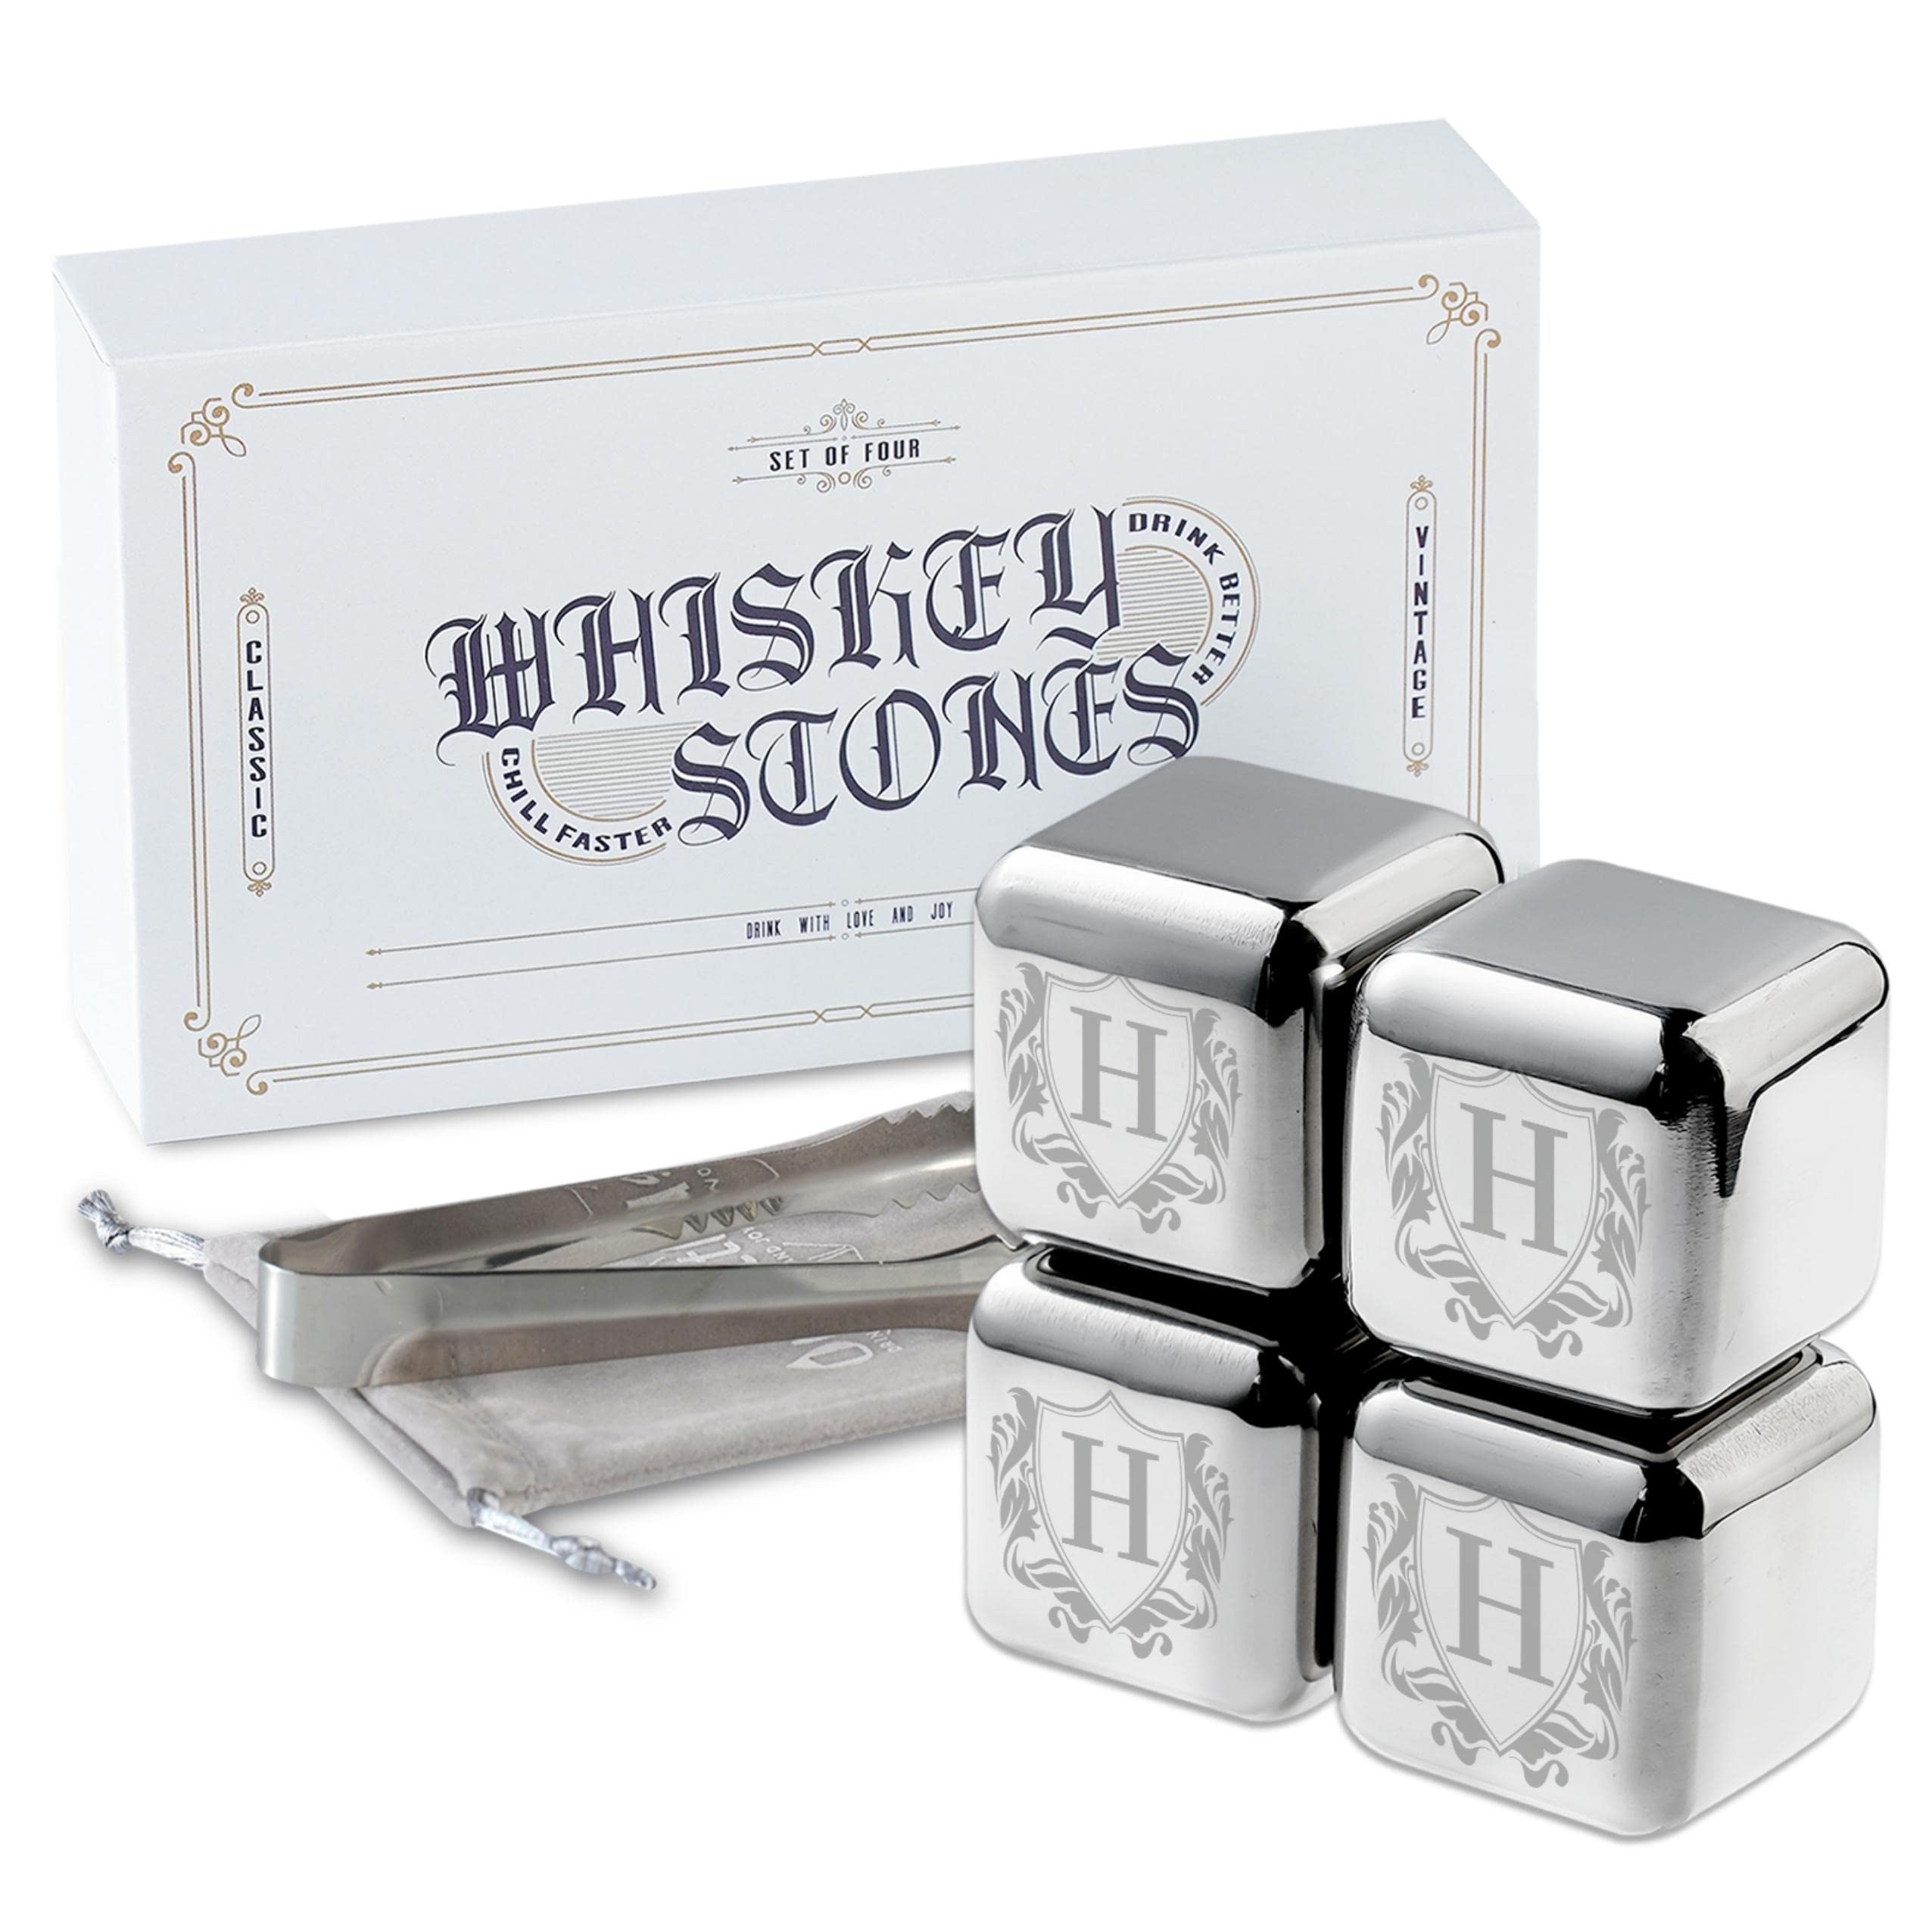 Whiskey Stones Gifts Set with Initial for Men & Women, 4pcs Stainless Steel Whiskey Rocks with Pouch and Tong, Chilling Ice Cubes Initial Gifts for Whiskey Lovers, Dad, Mom, Grandpa, Uncle - H